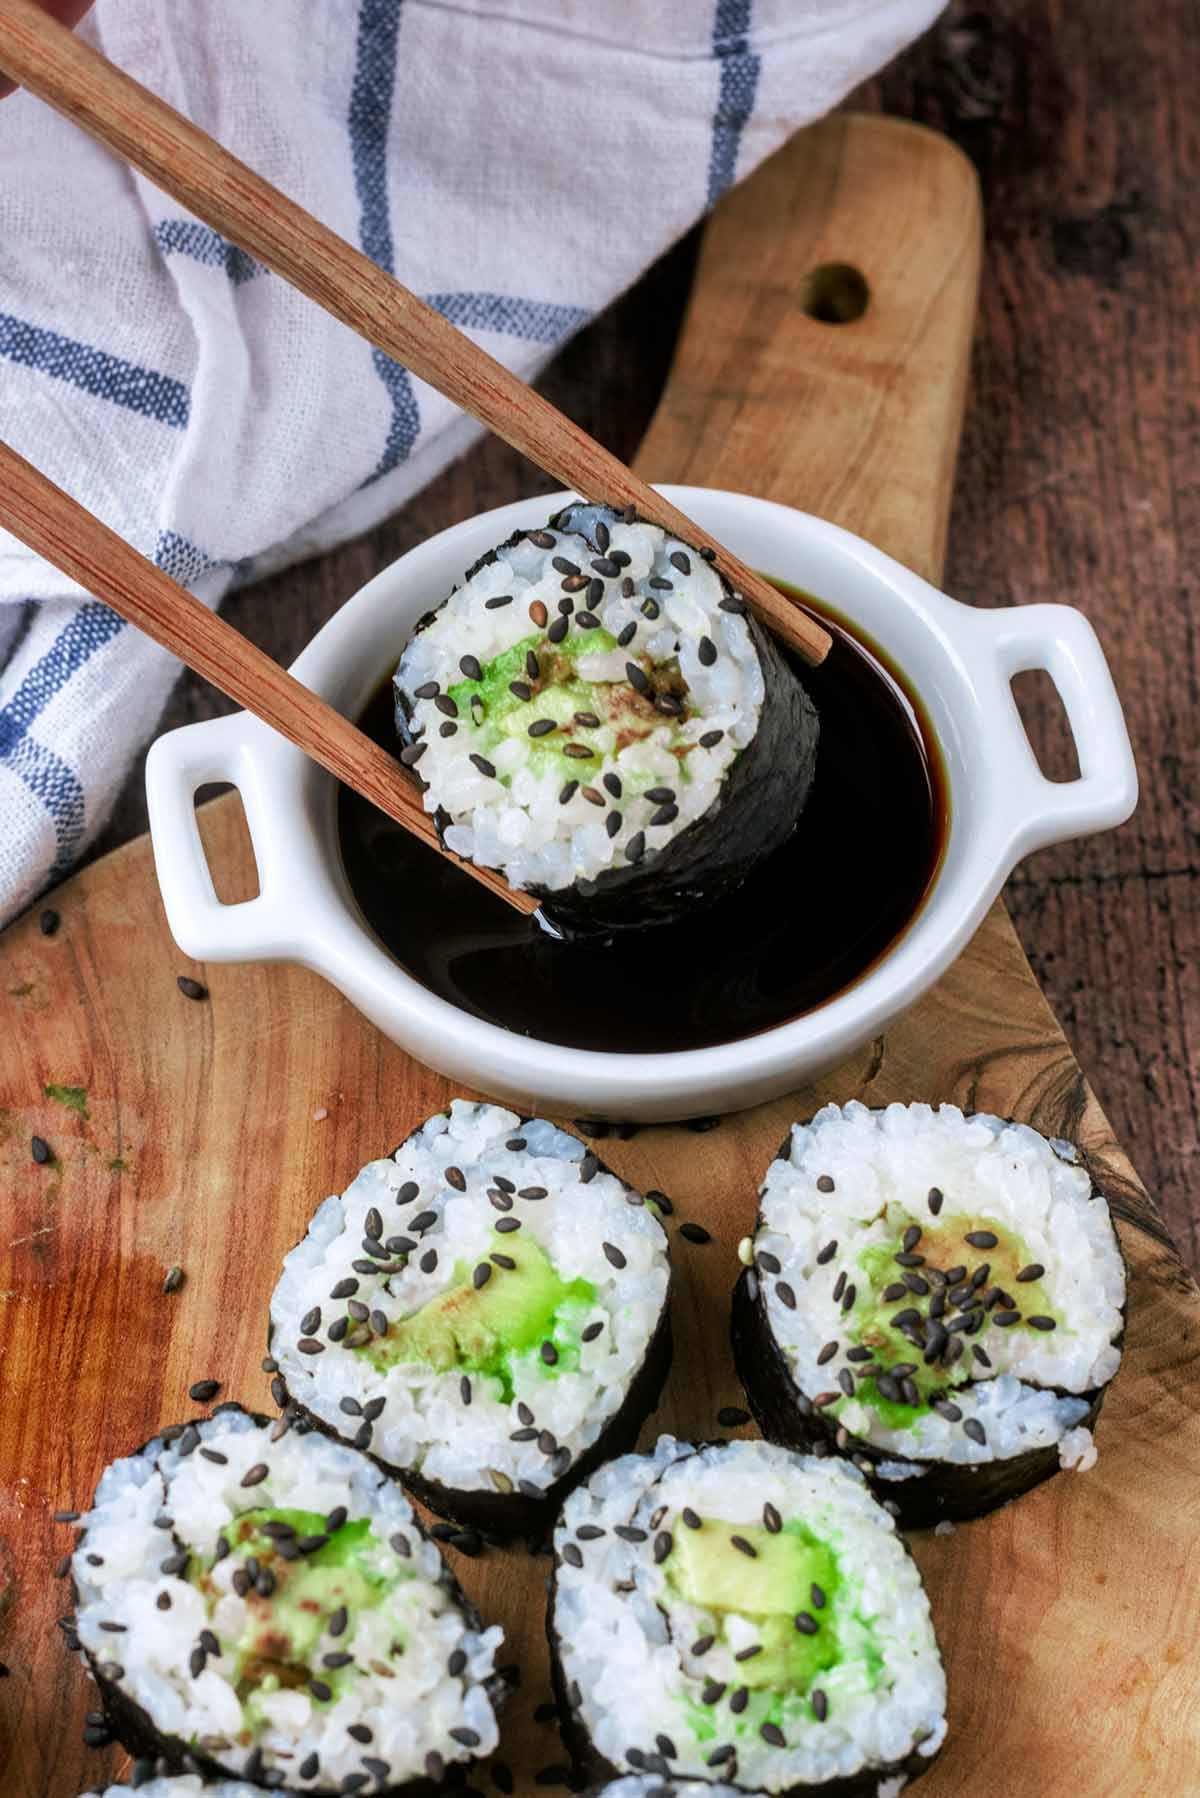 A pair of chopsticks dipping some avocado sushi into a small dish of soy sauce.